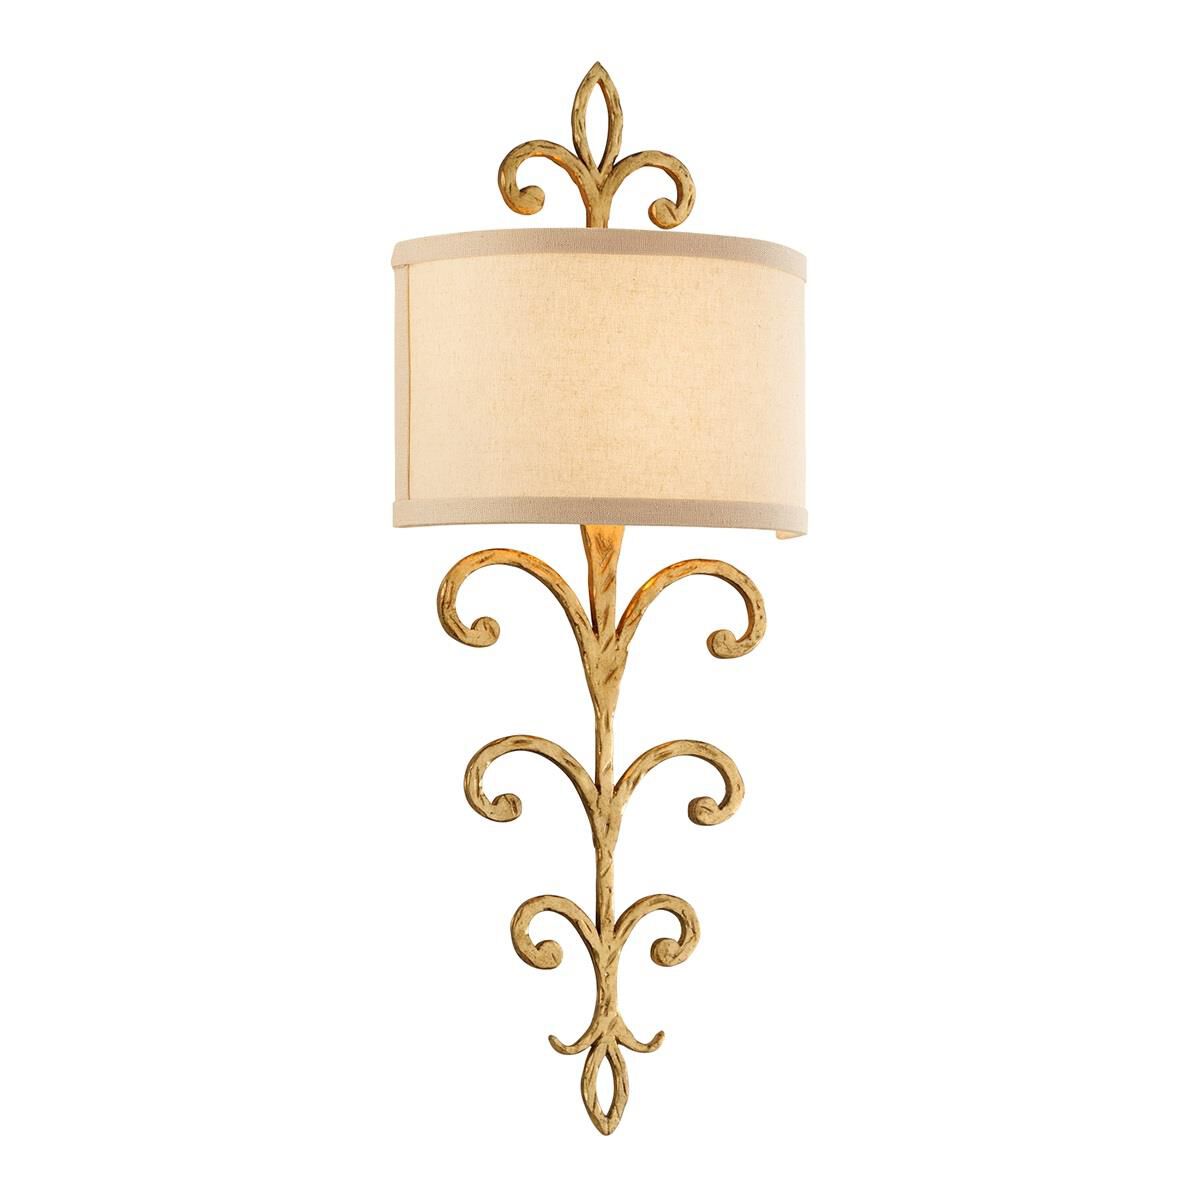 Photos - Chandelier / Lamp Troy Lighting Crawford 11 Inch Wall Sconce Crawford - B7182 - Traditional